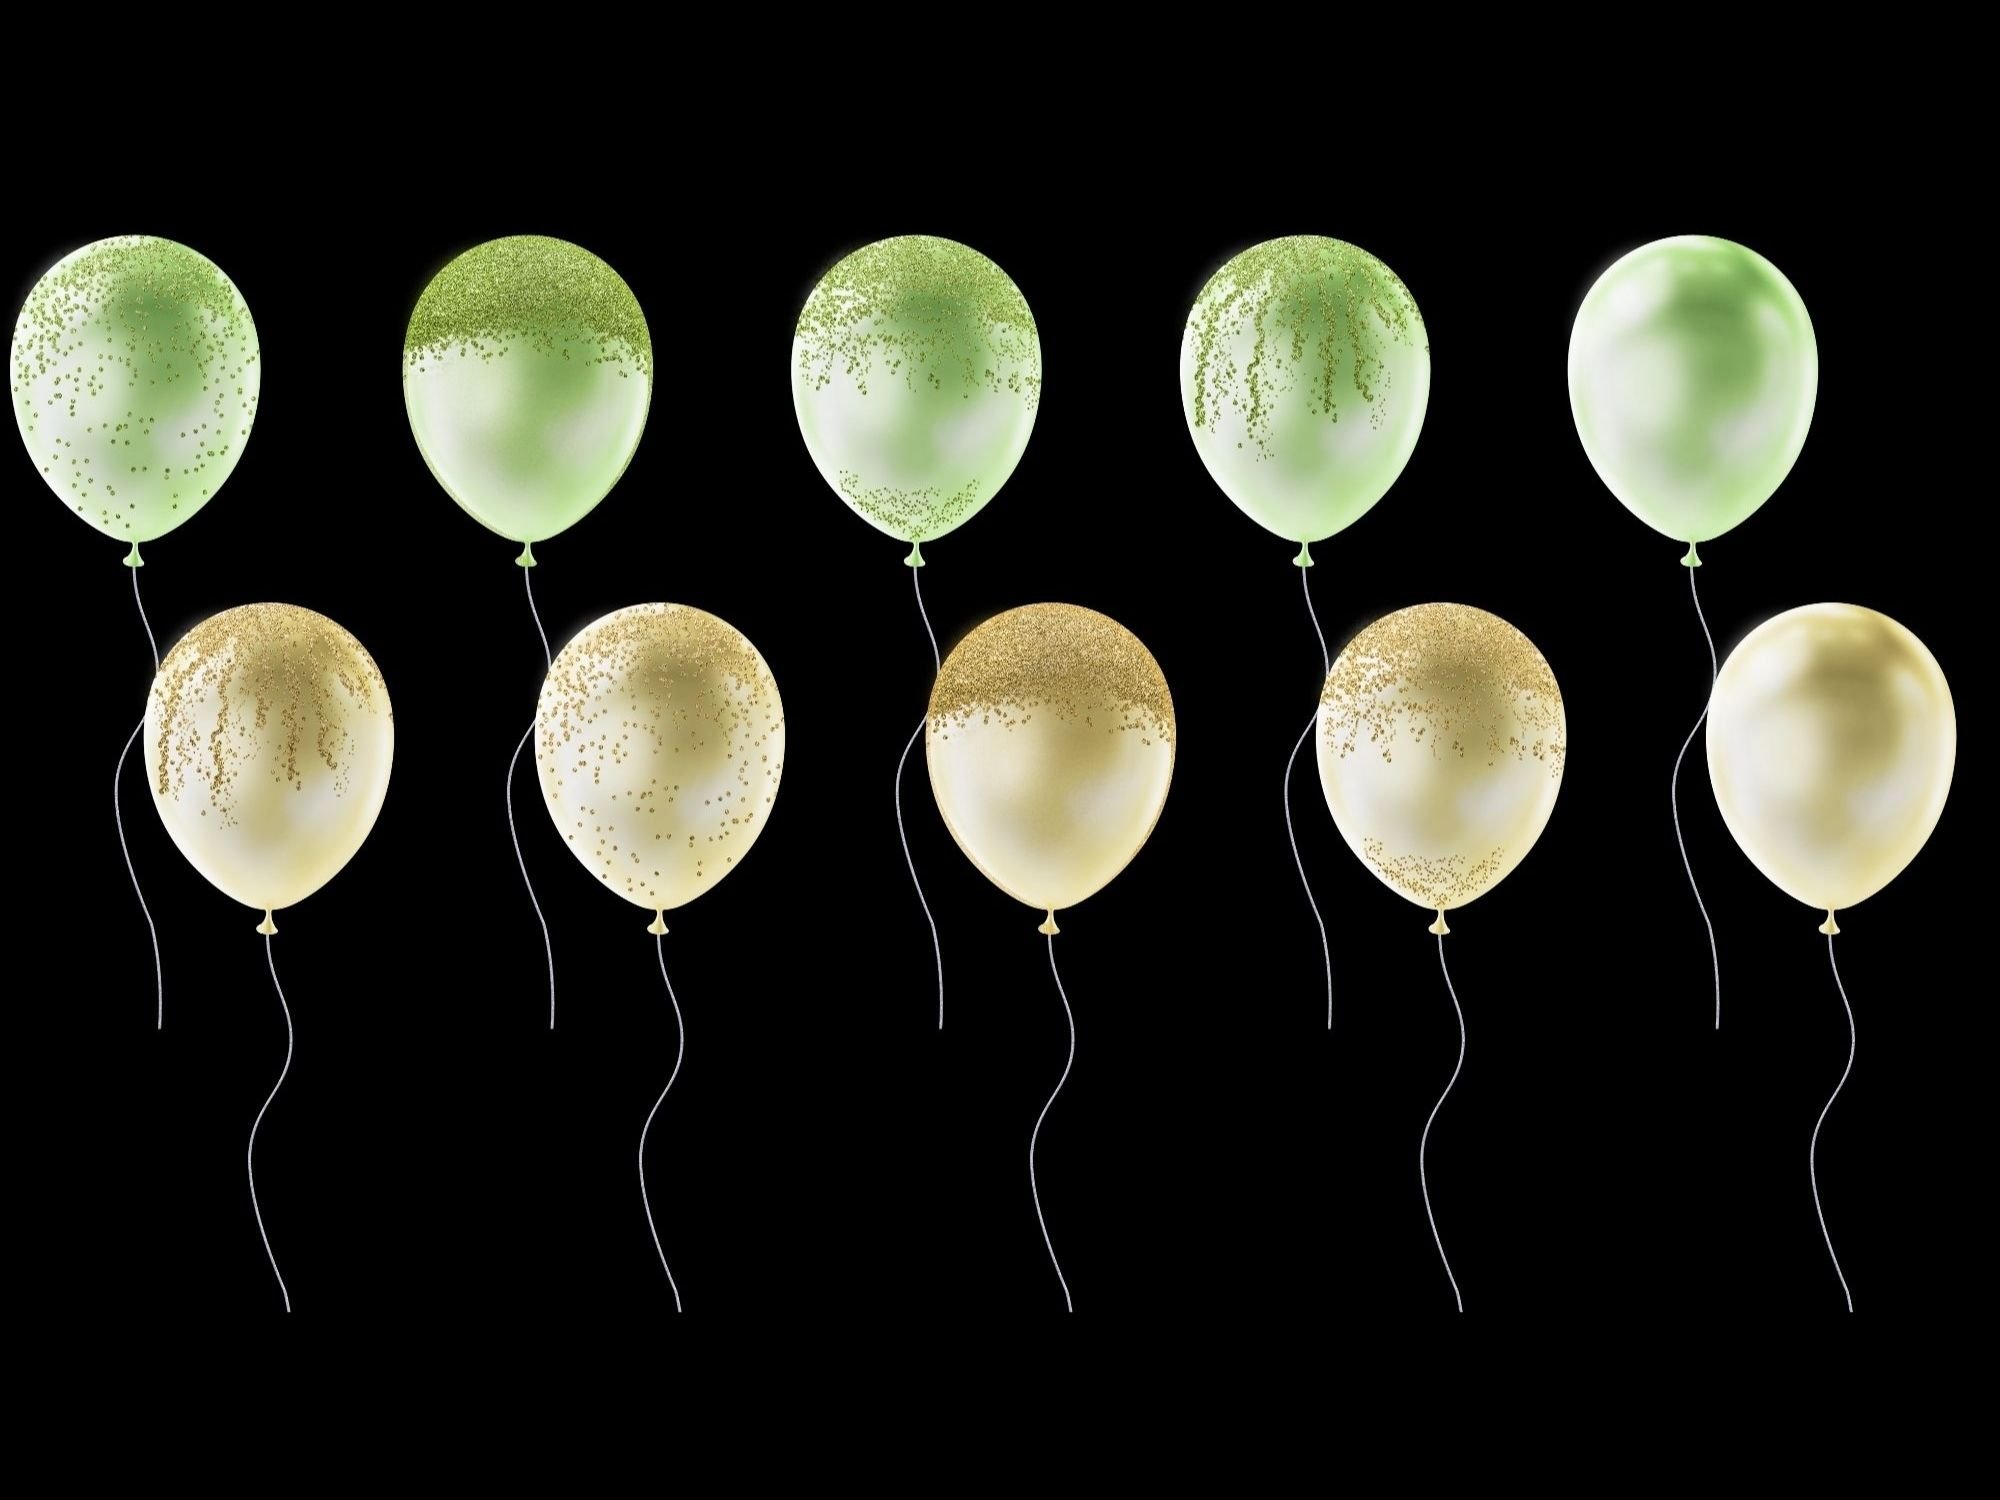 Black background with green and yellow balloons.